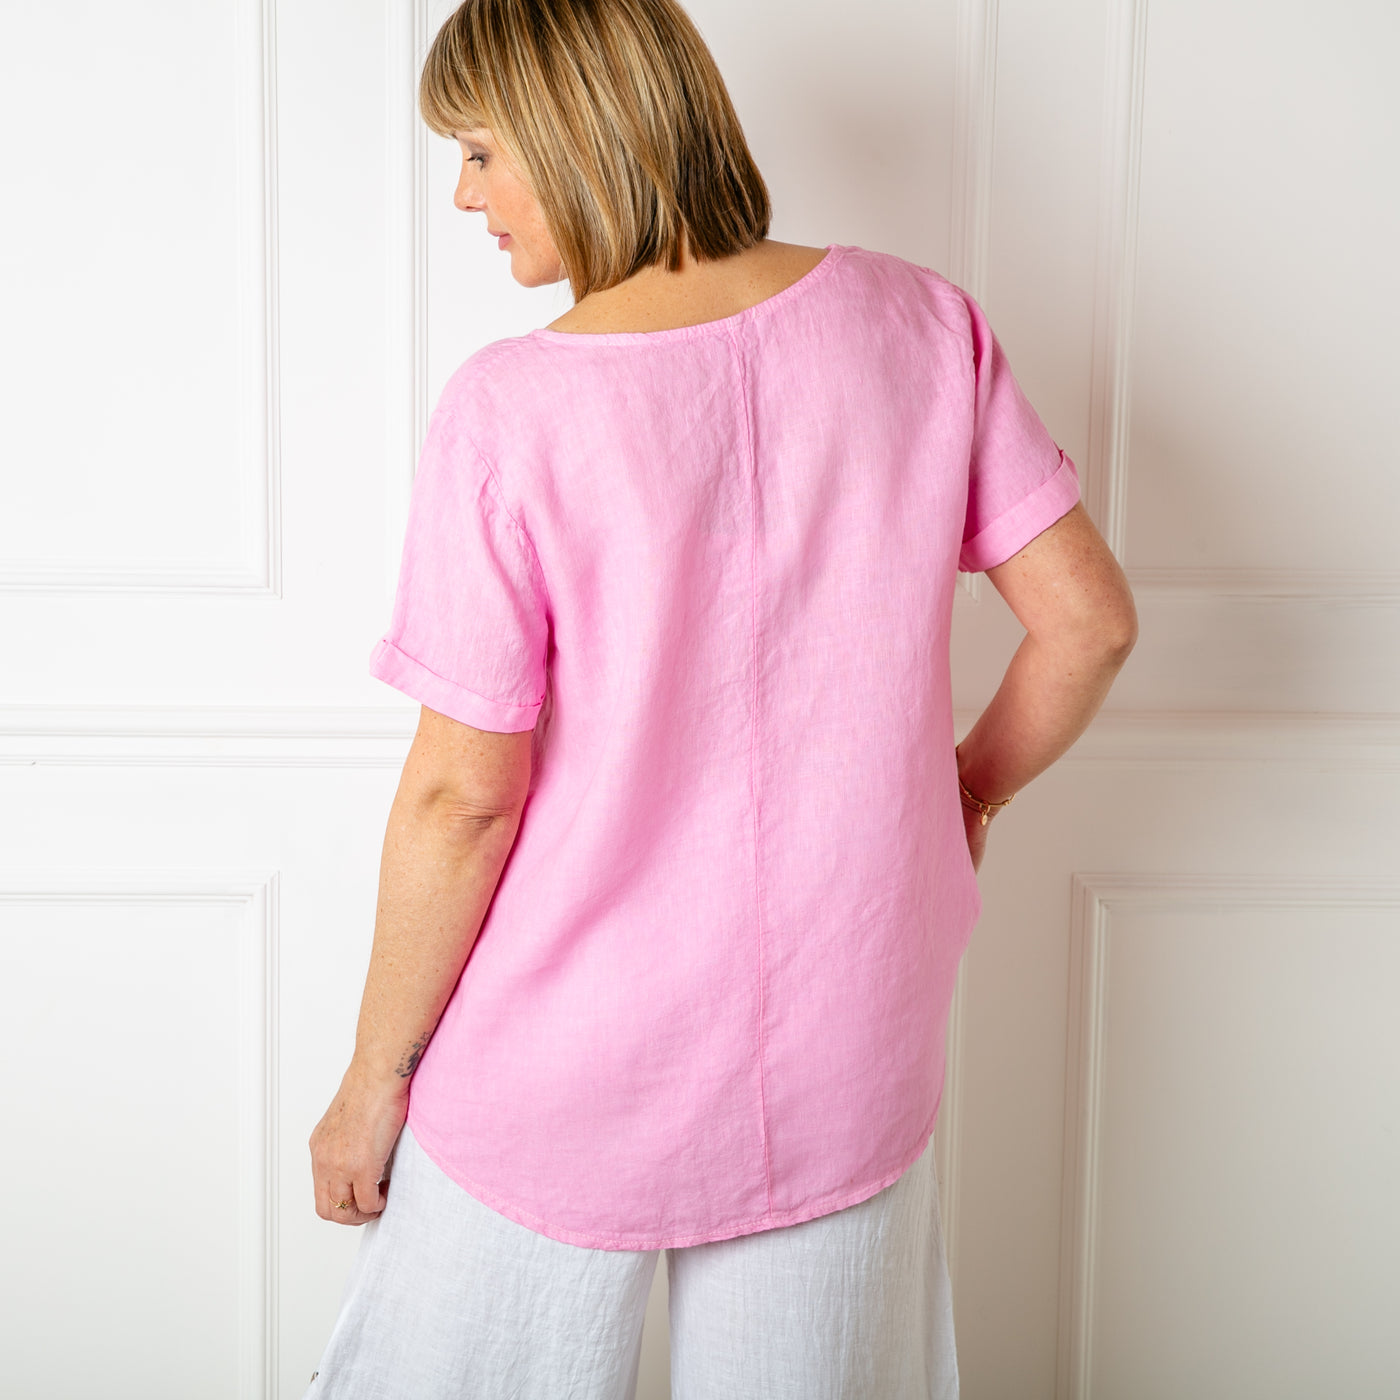 The pink Button Down Linen Top made from 100% linen, perfect for a lightweight, cool summer look